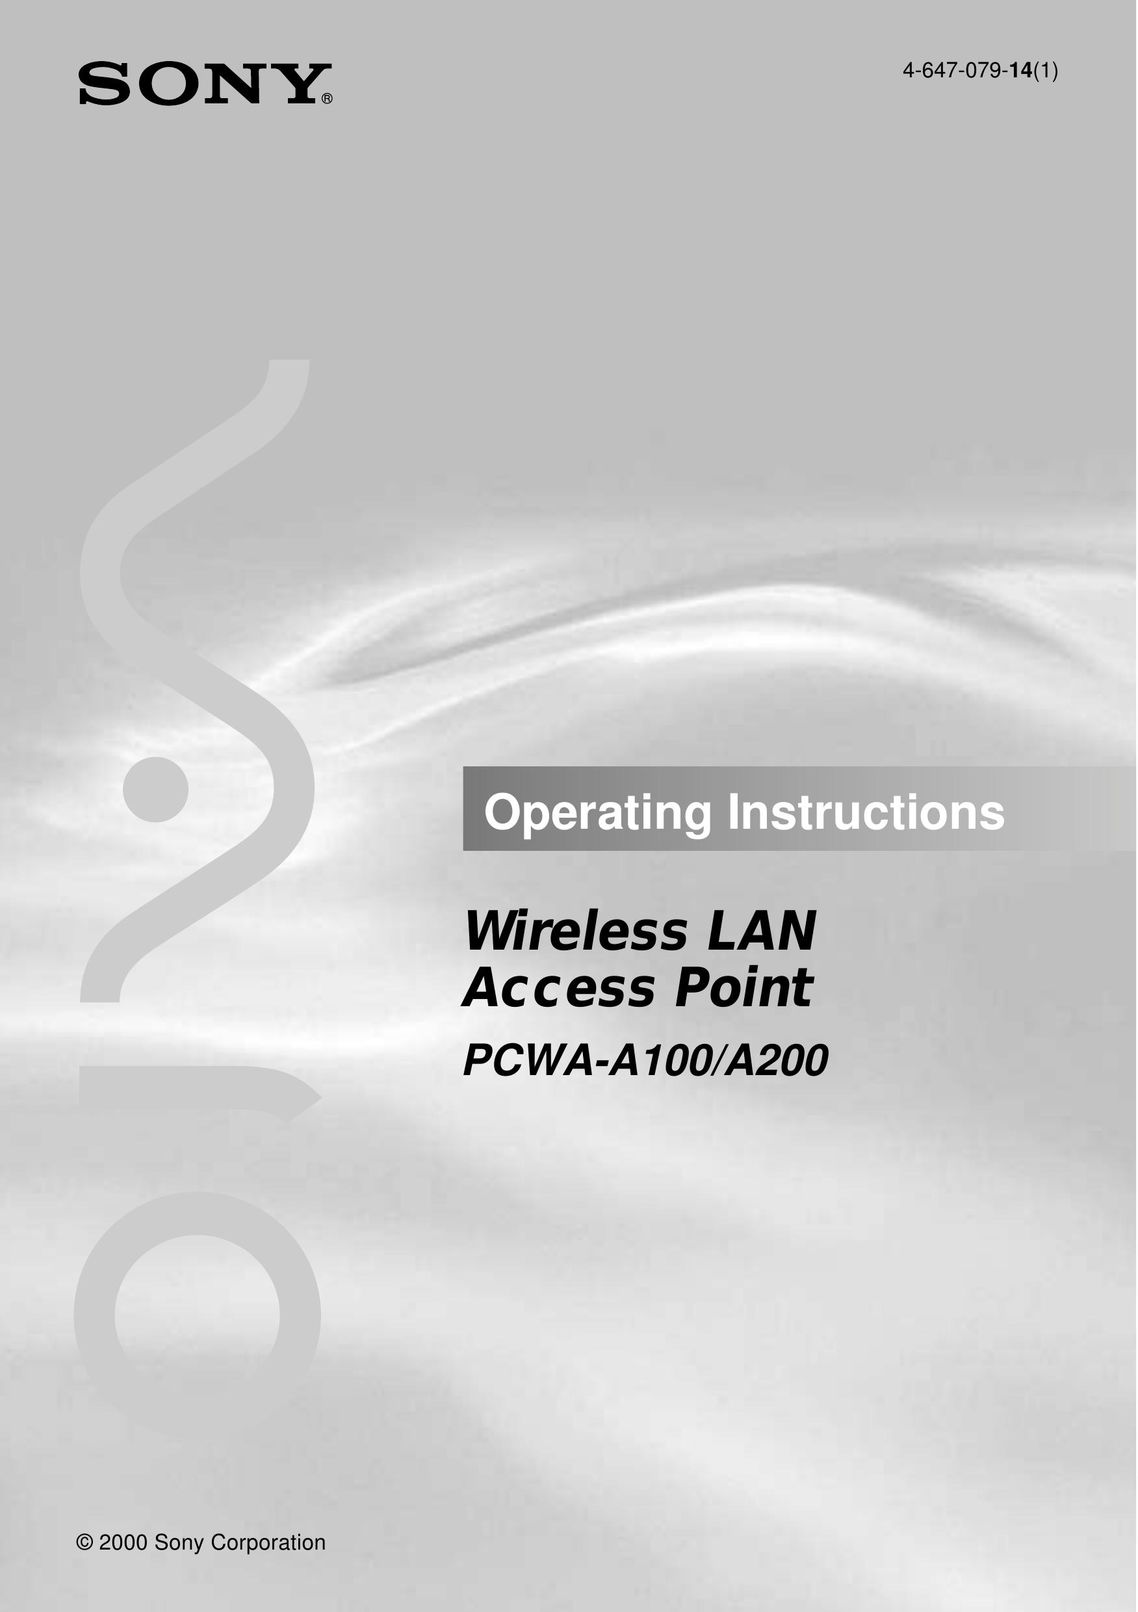 Sony PCWA-A200 Network Router User Manual